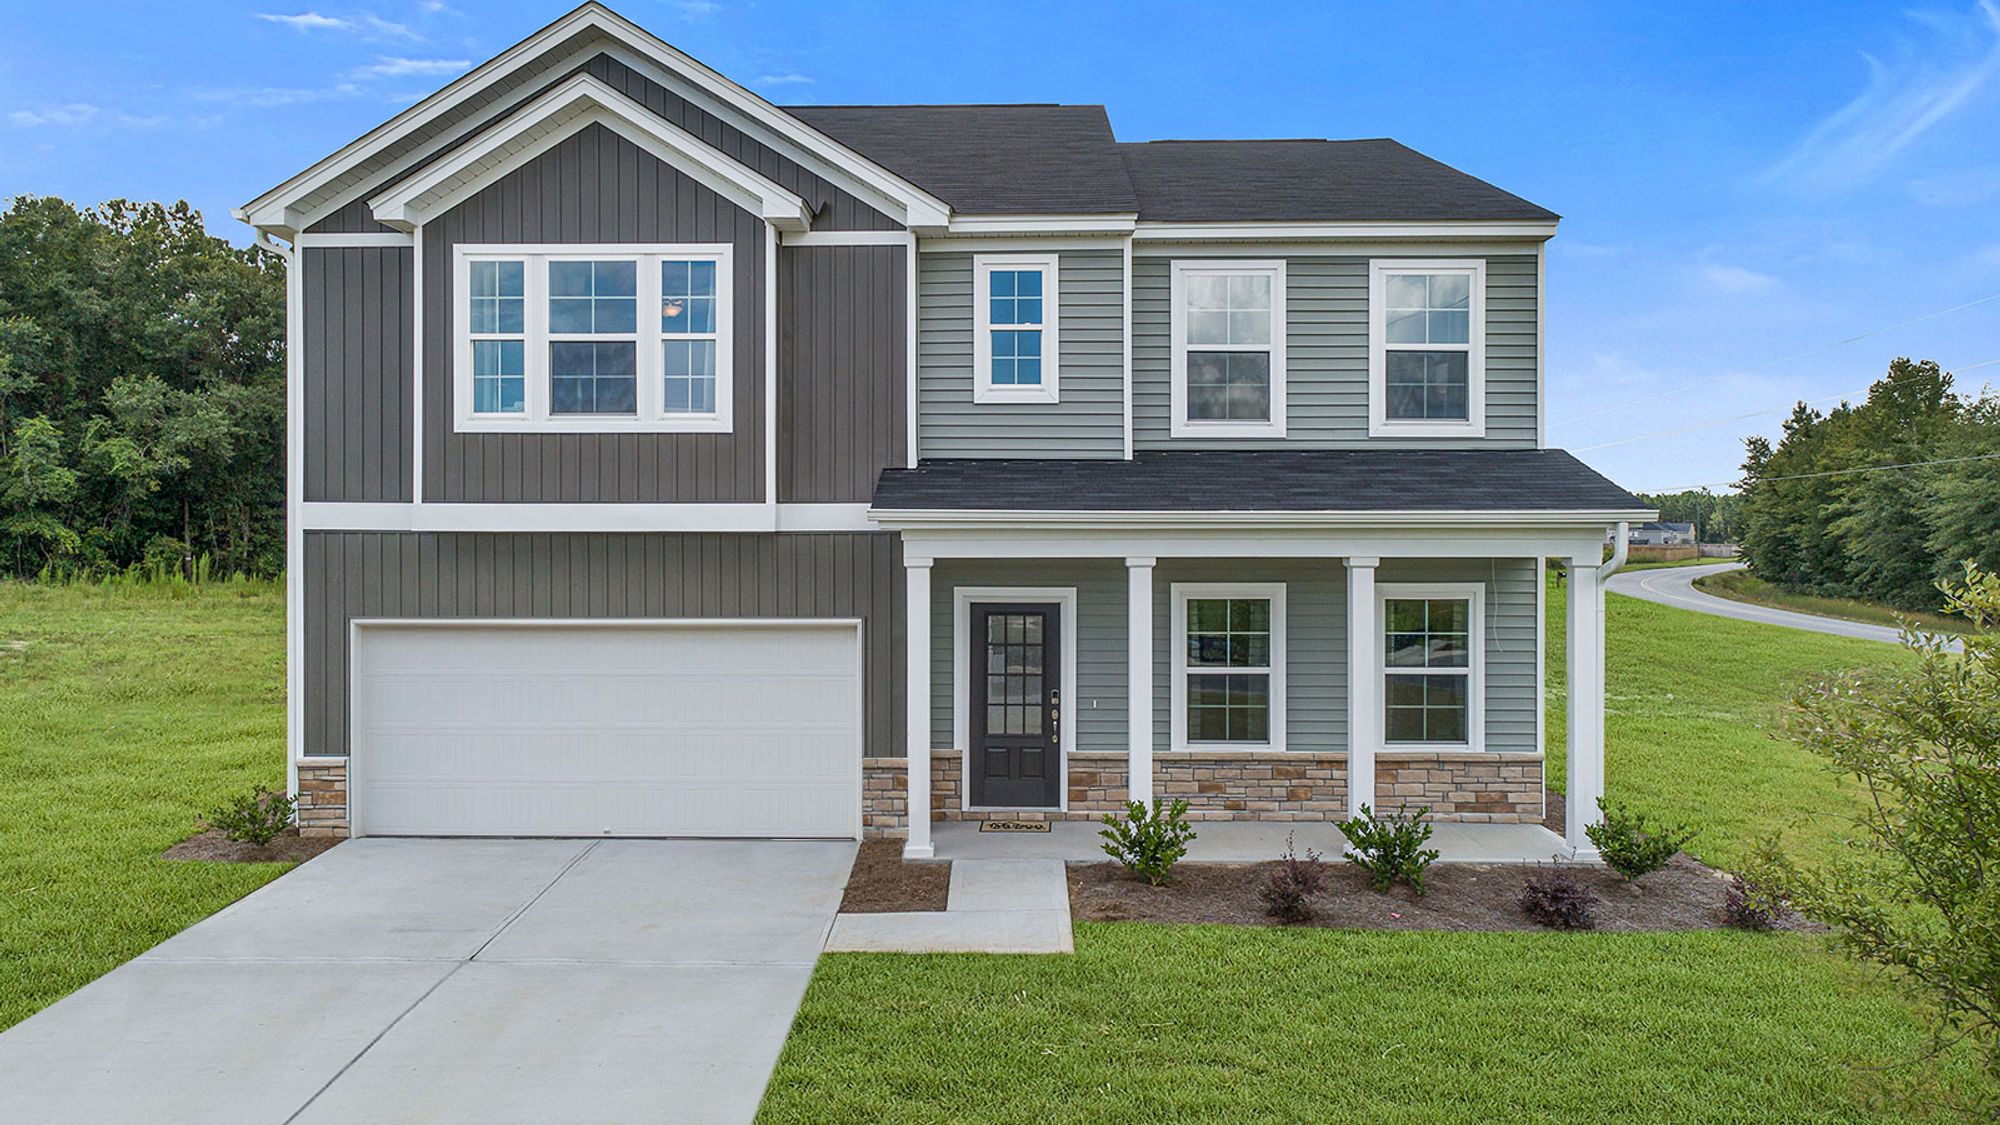 New home for sale in Ludowici GA featuring Mungo's Russell Plan